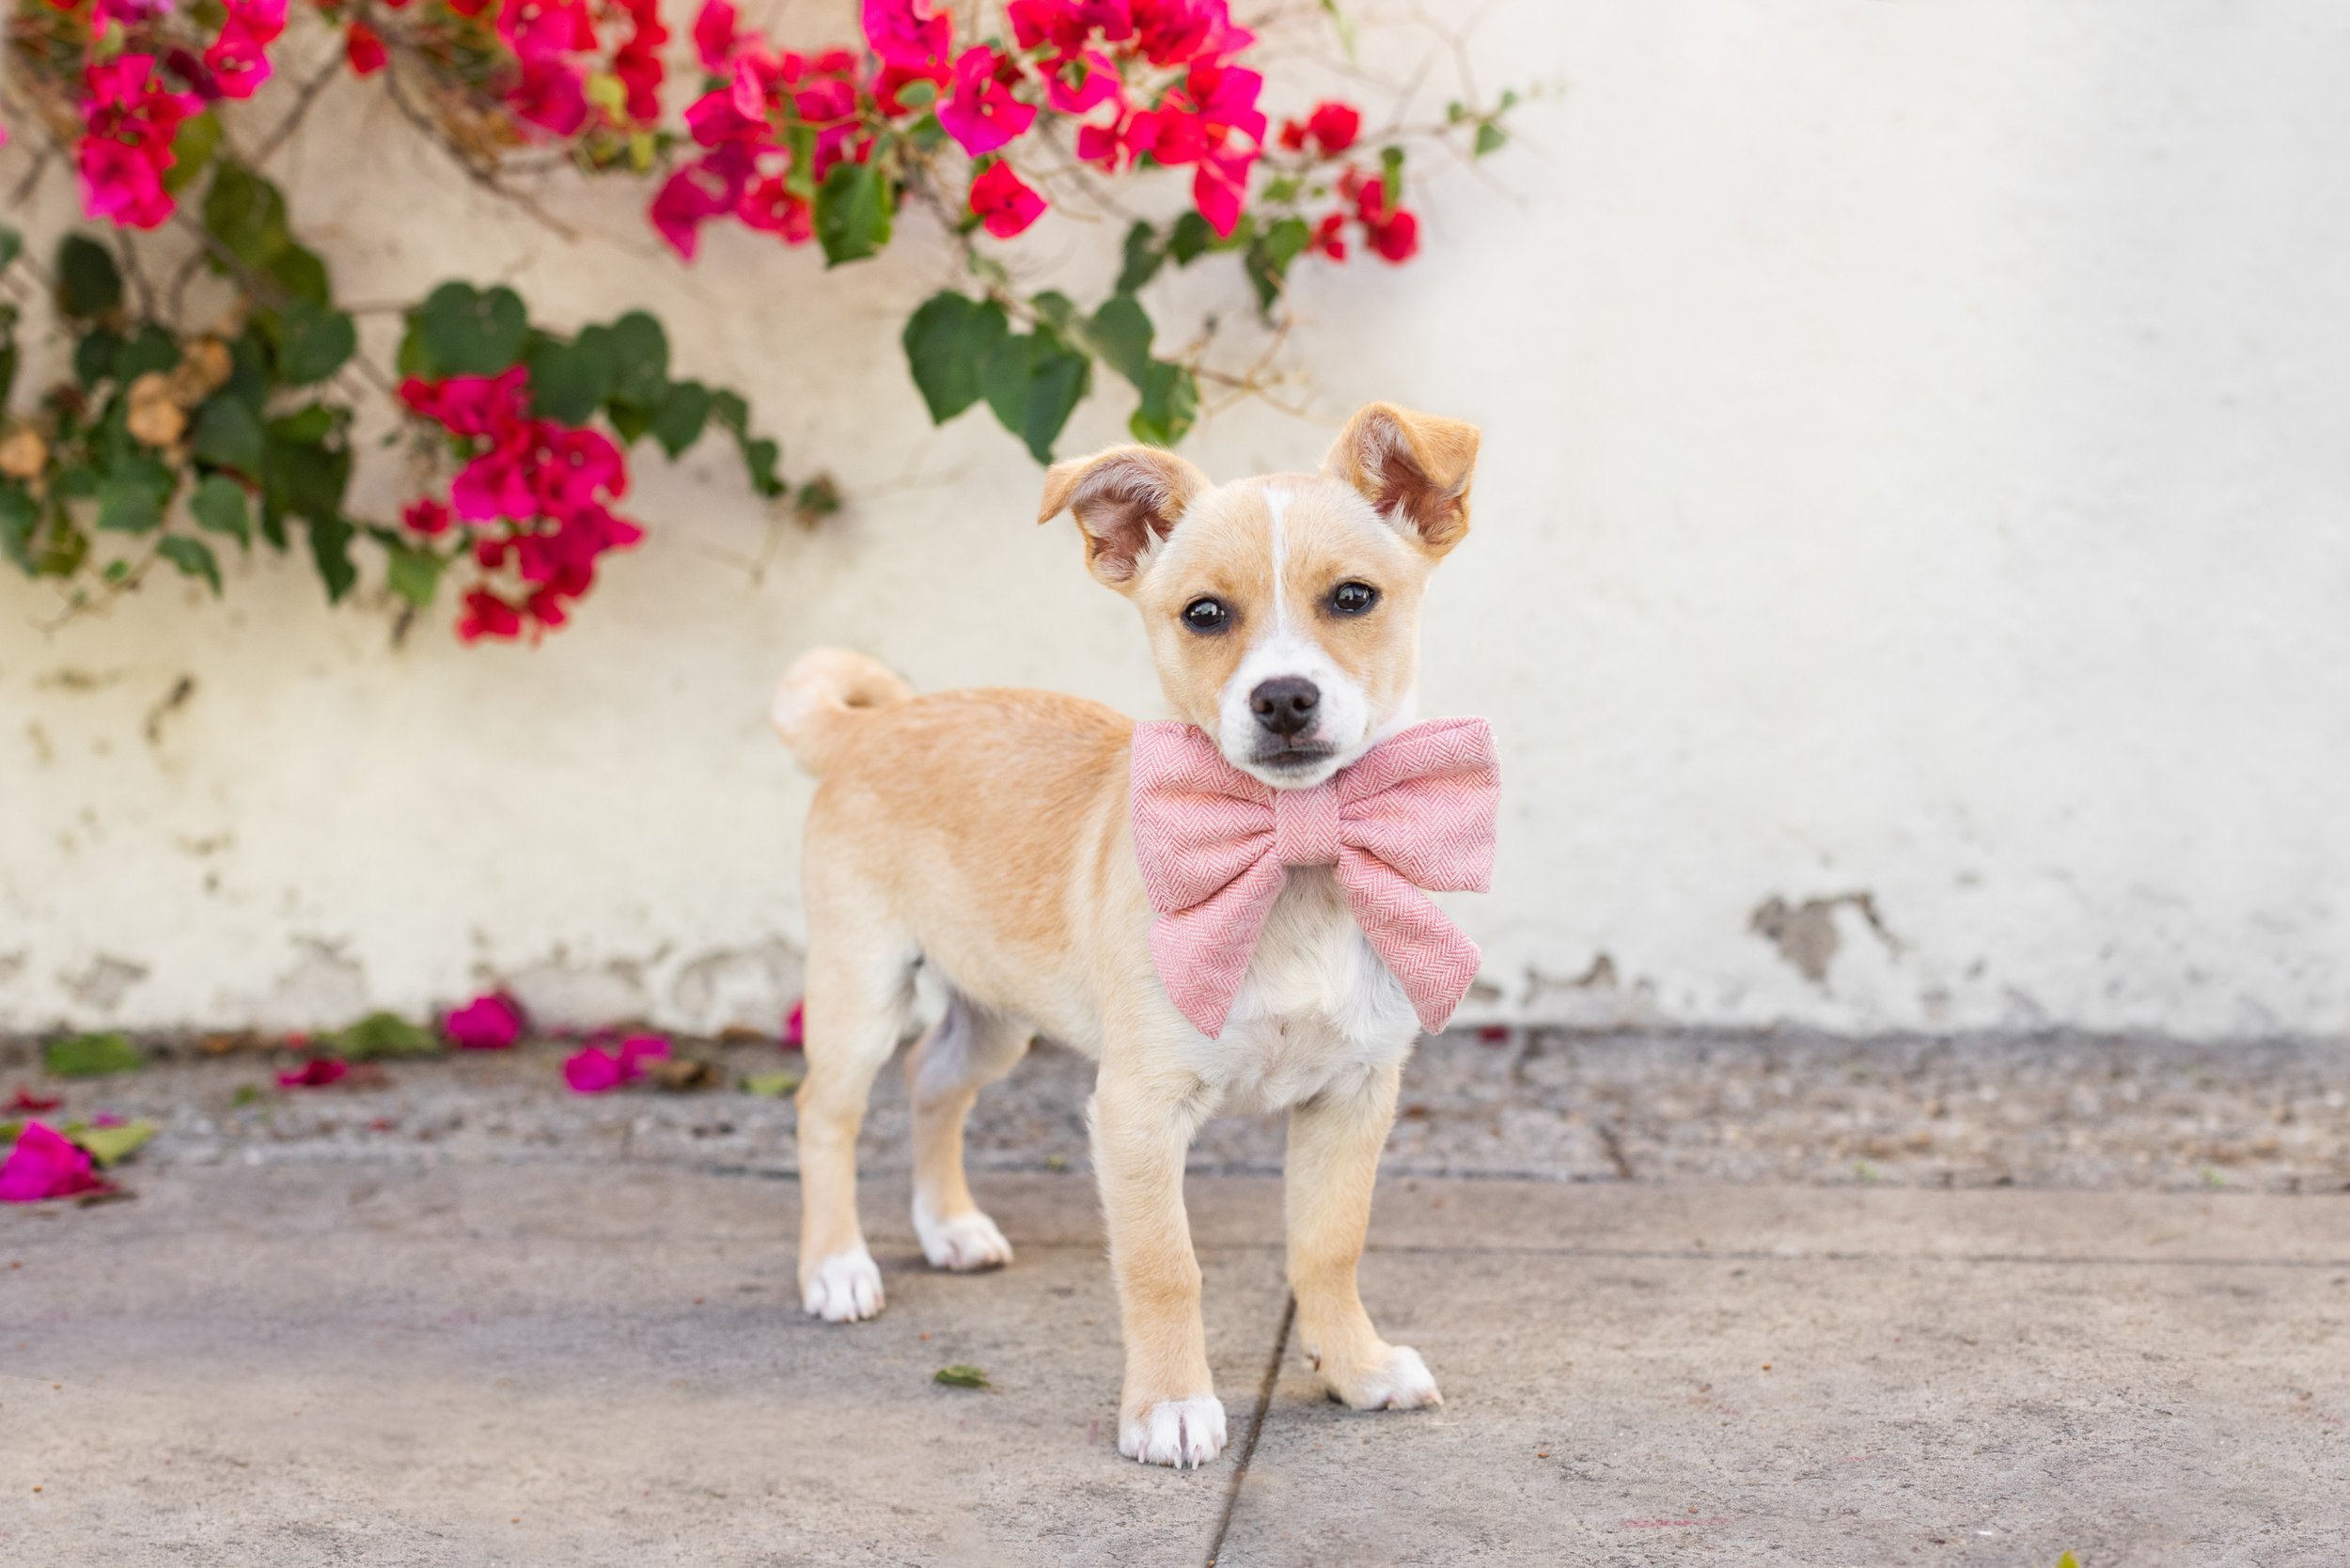 www.santabarbarawedding.com | Veils &amp; Tails Photography | Small Puppy in Large Pink Bowtie